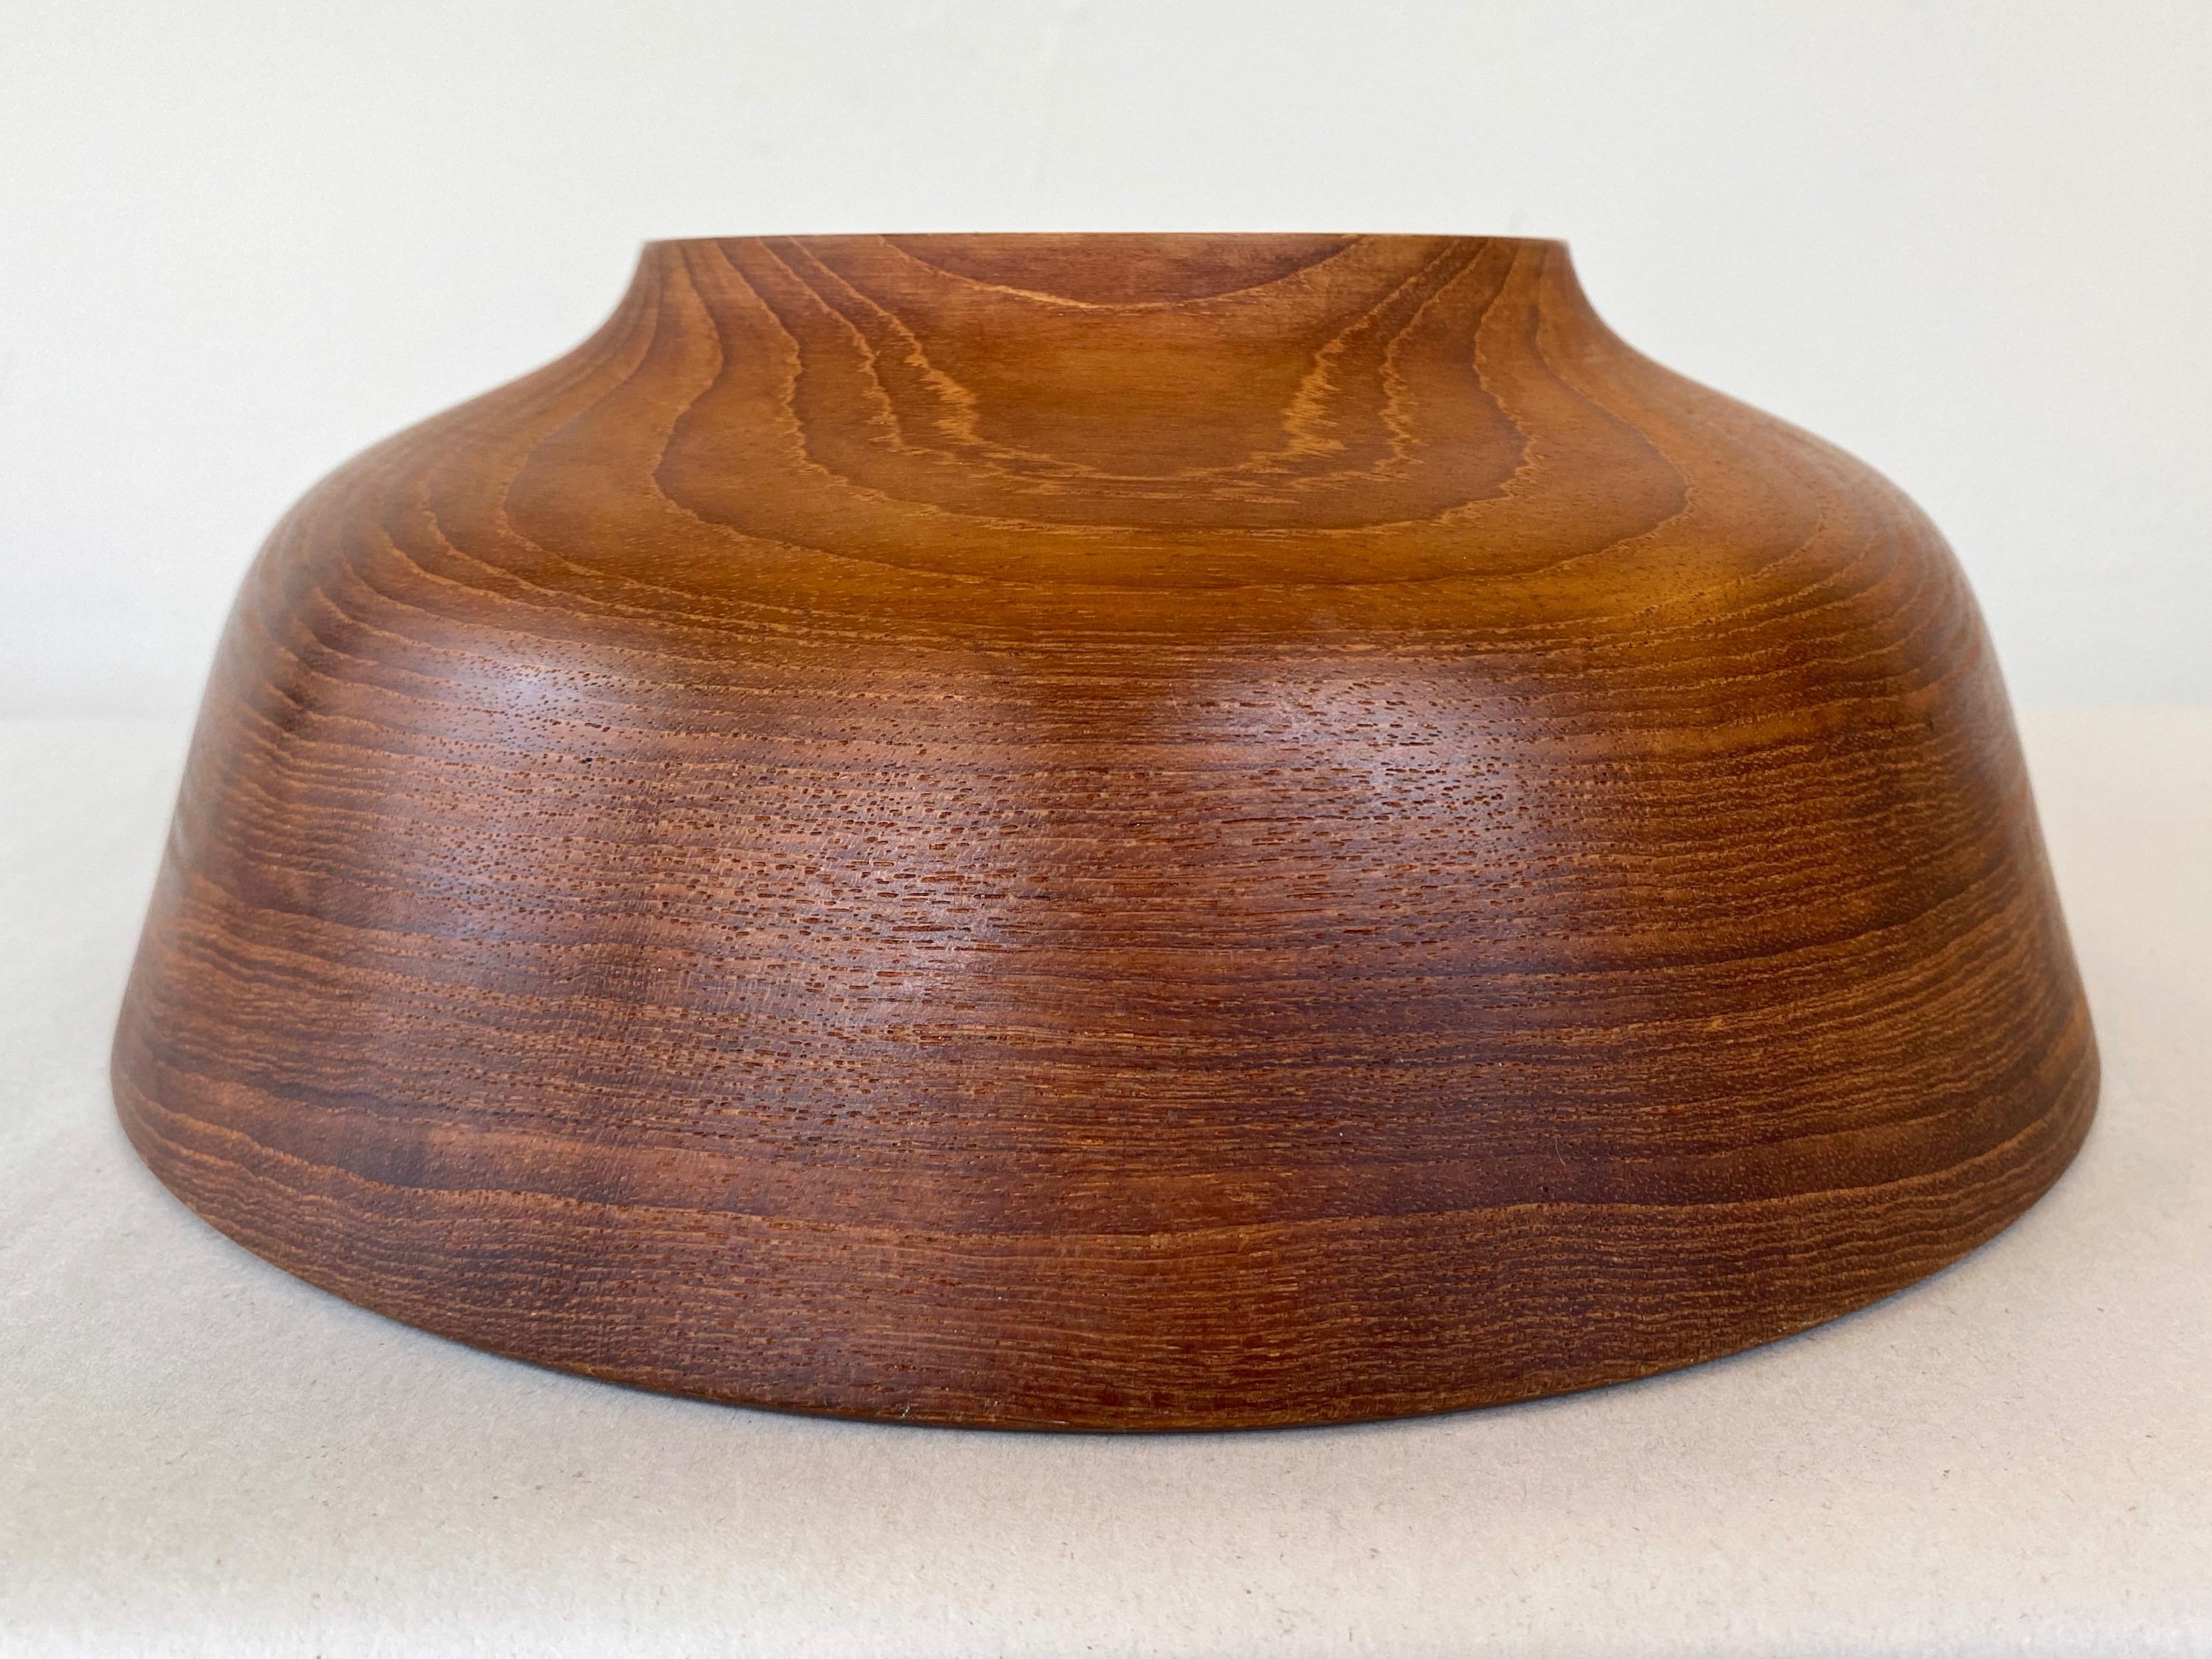 Bob Stocksdale Teak Turned Wood Bowl with Exceptional Grain Pattern, Early 1970s For Sale 10